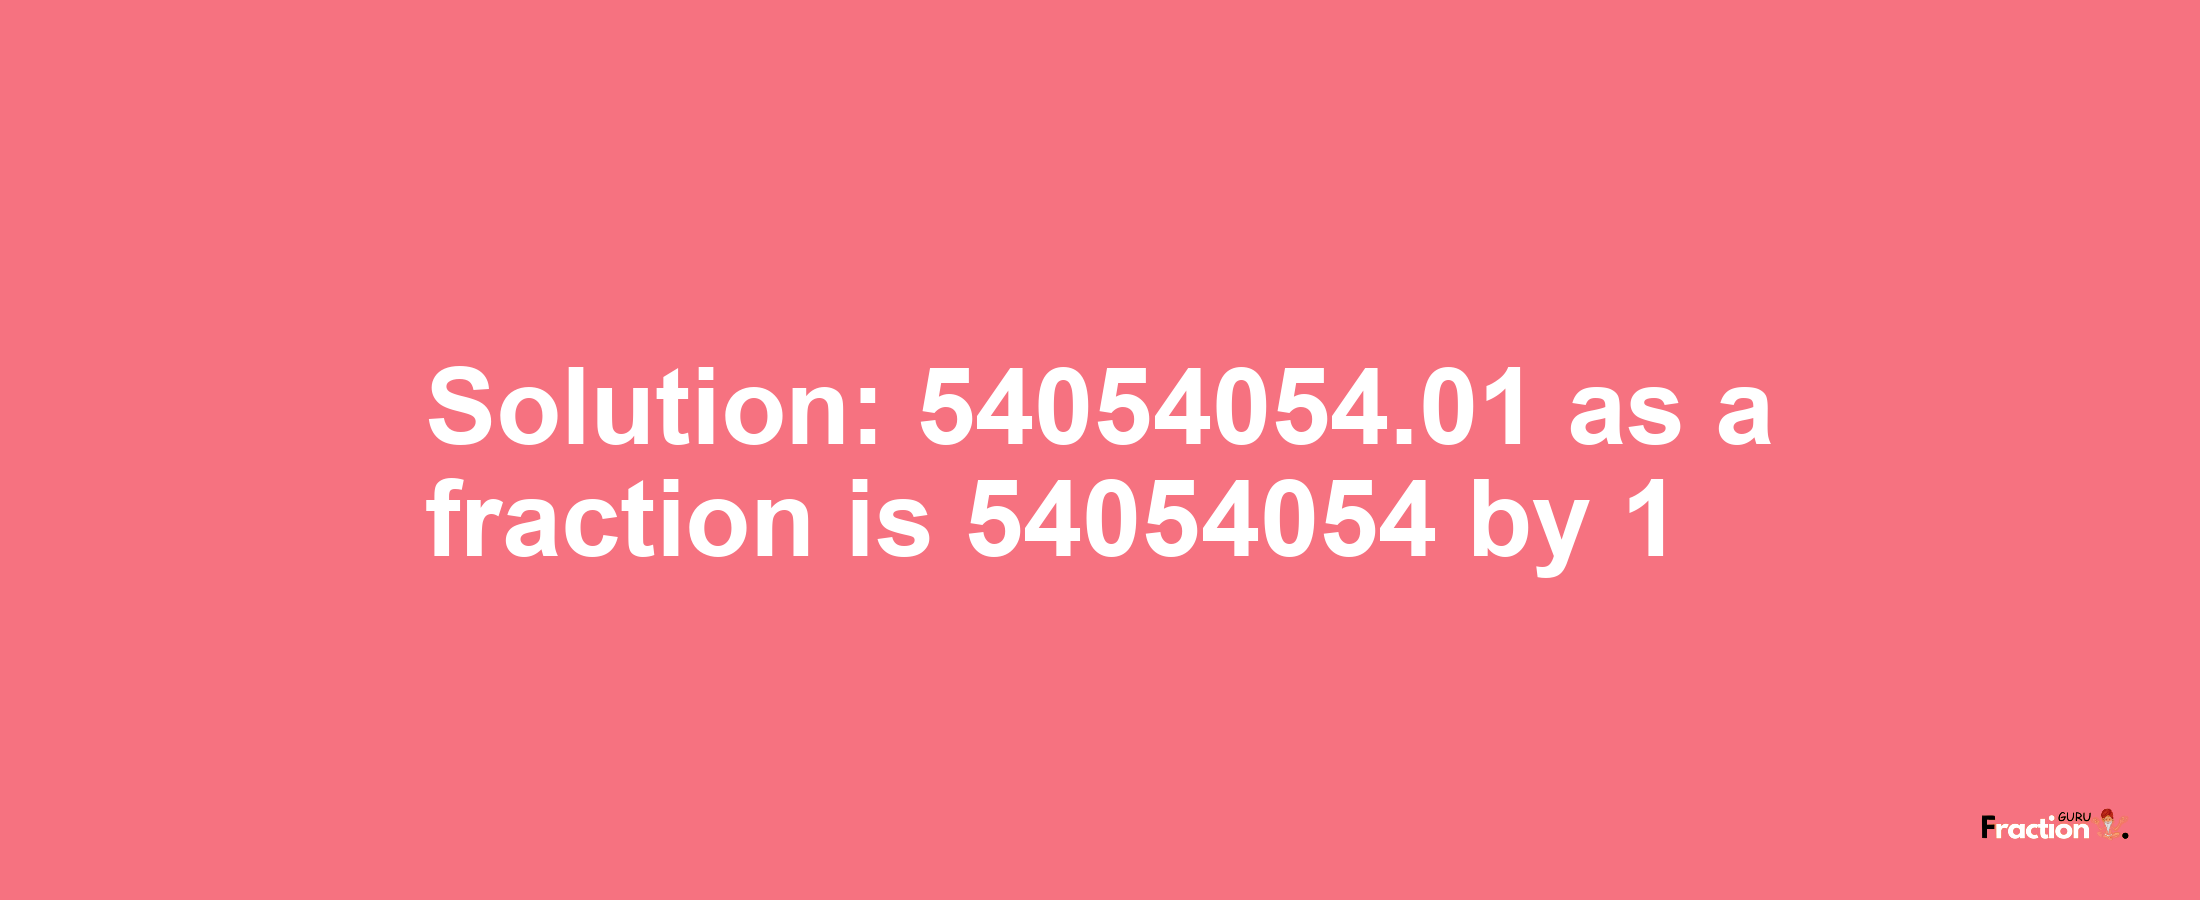 Solution:54054054.01 as a fraction is 54054054/1